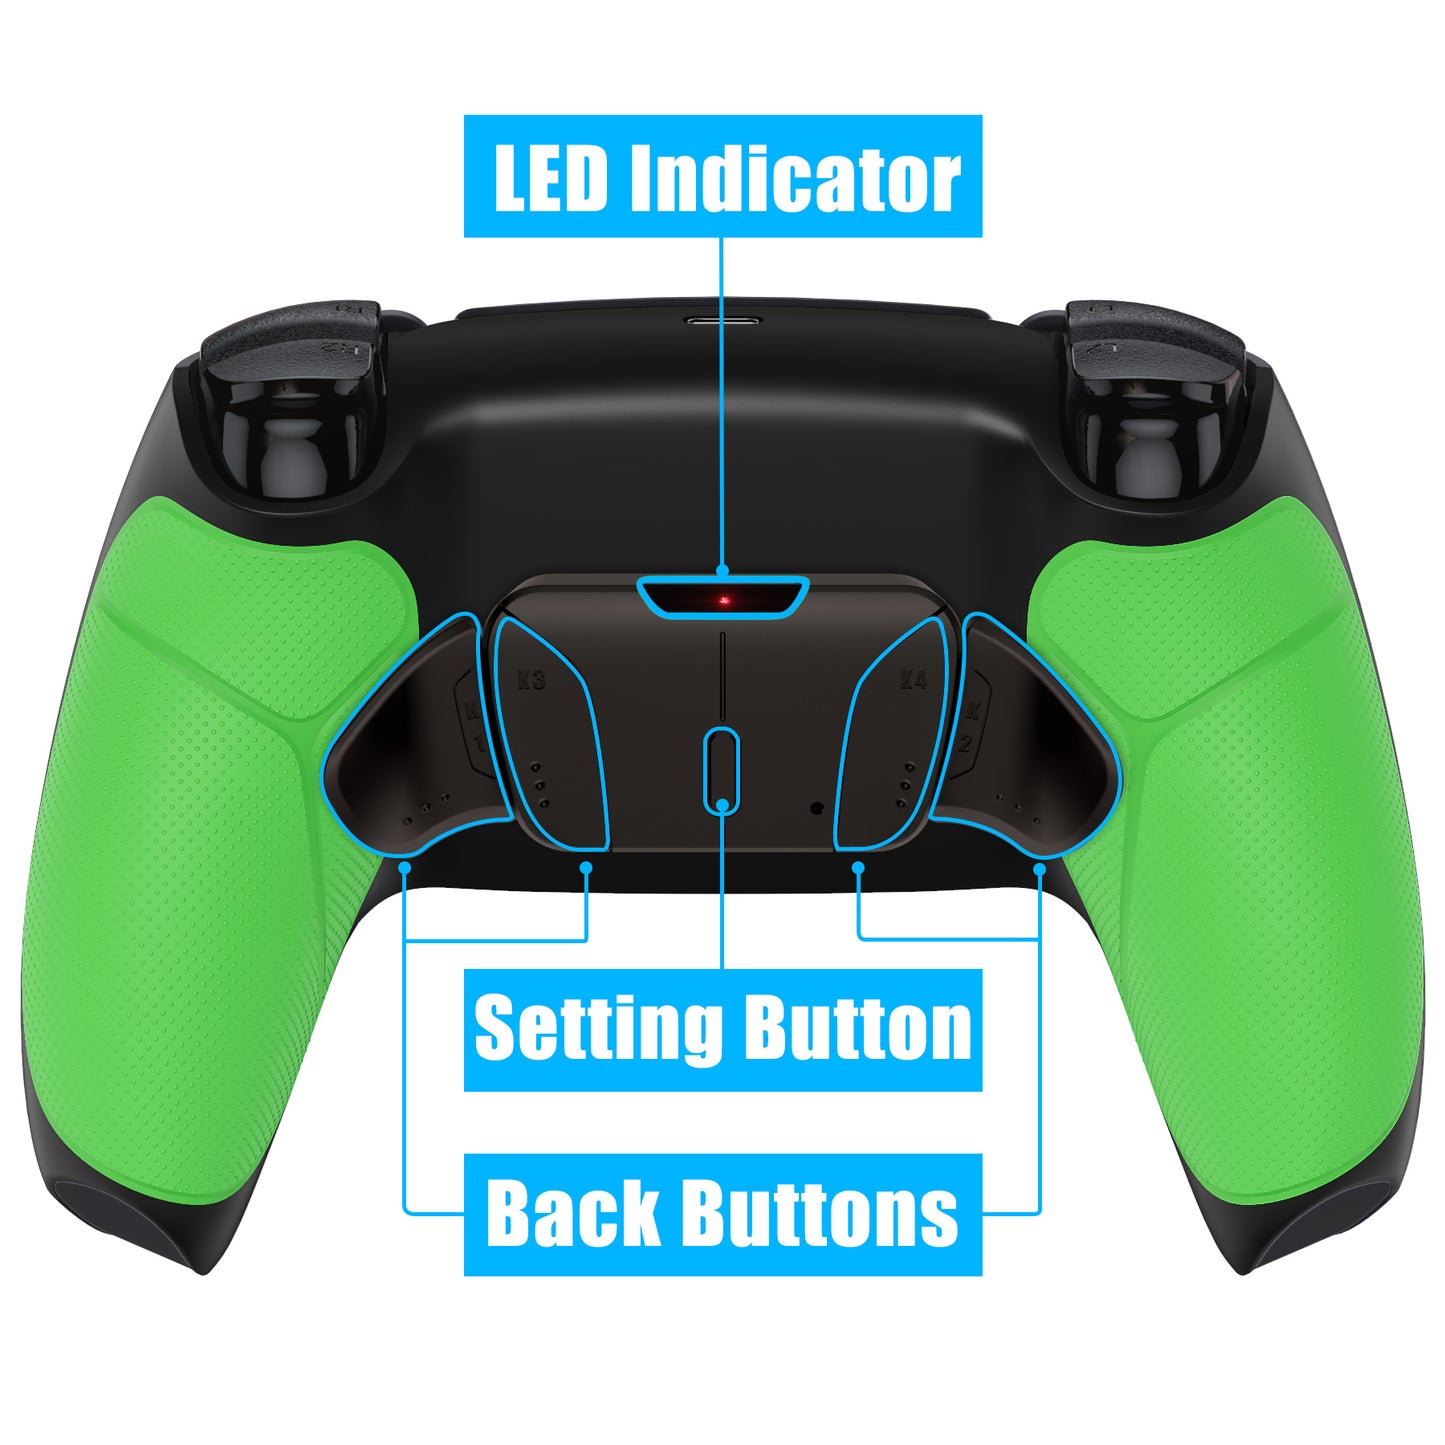 eXtremeRate Retail Rubberized Green Grip Remappable Real Metal Buttons (RMB) Version RISE4 Remap Kit for PS5 Controller BDM-030, Upgrade Board & Redesigned Black Back Shell & 4 Back Buttons for PS5 Controller - YPFJ7003G3